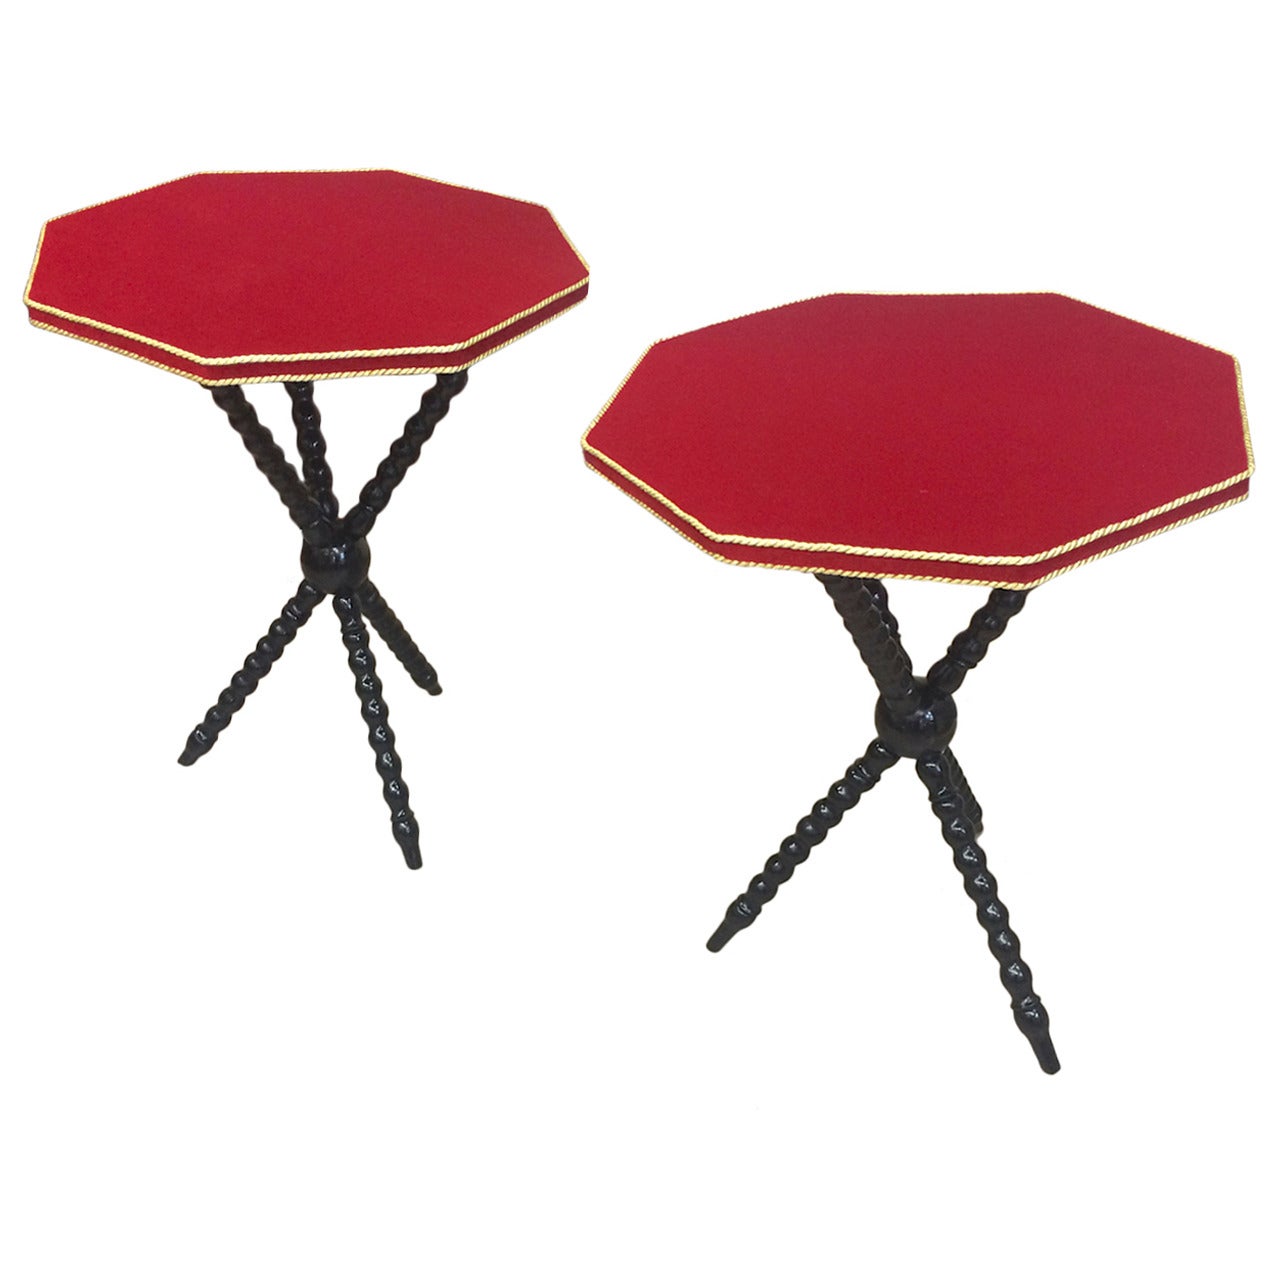 Pair of Neoclassic Side Tables with Red Velvet Top, 1940s For Sale